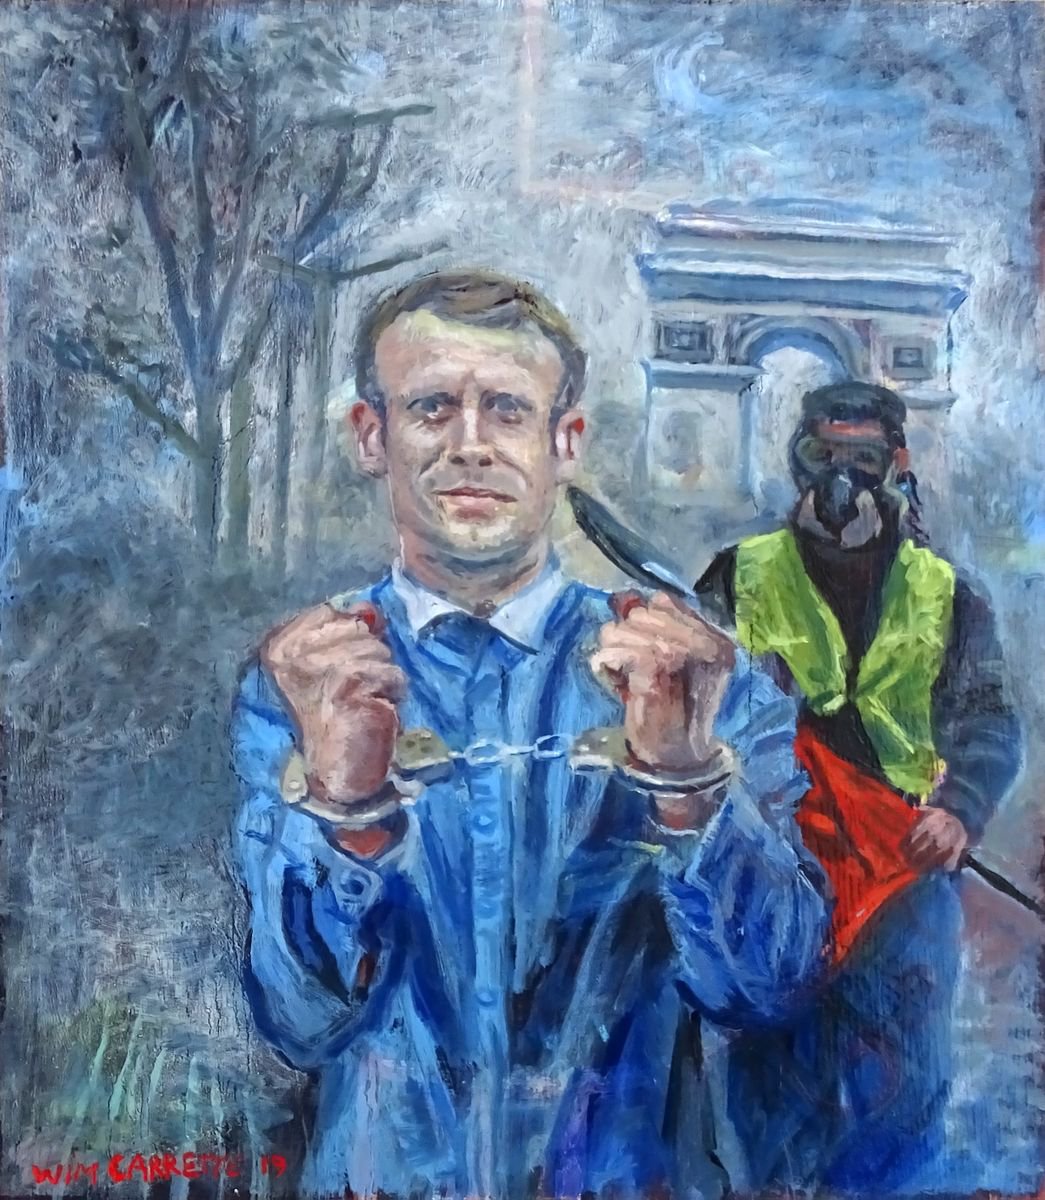 Victory of the -gilets jaunes- by Wim Carrette